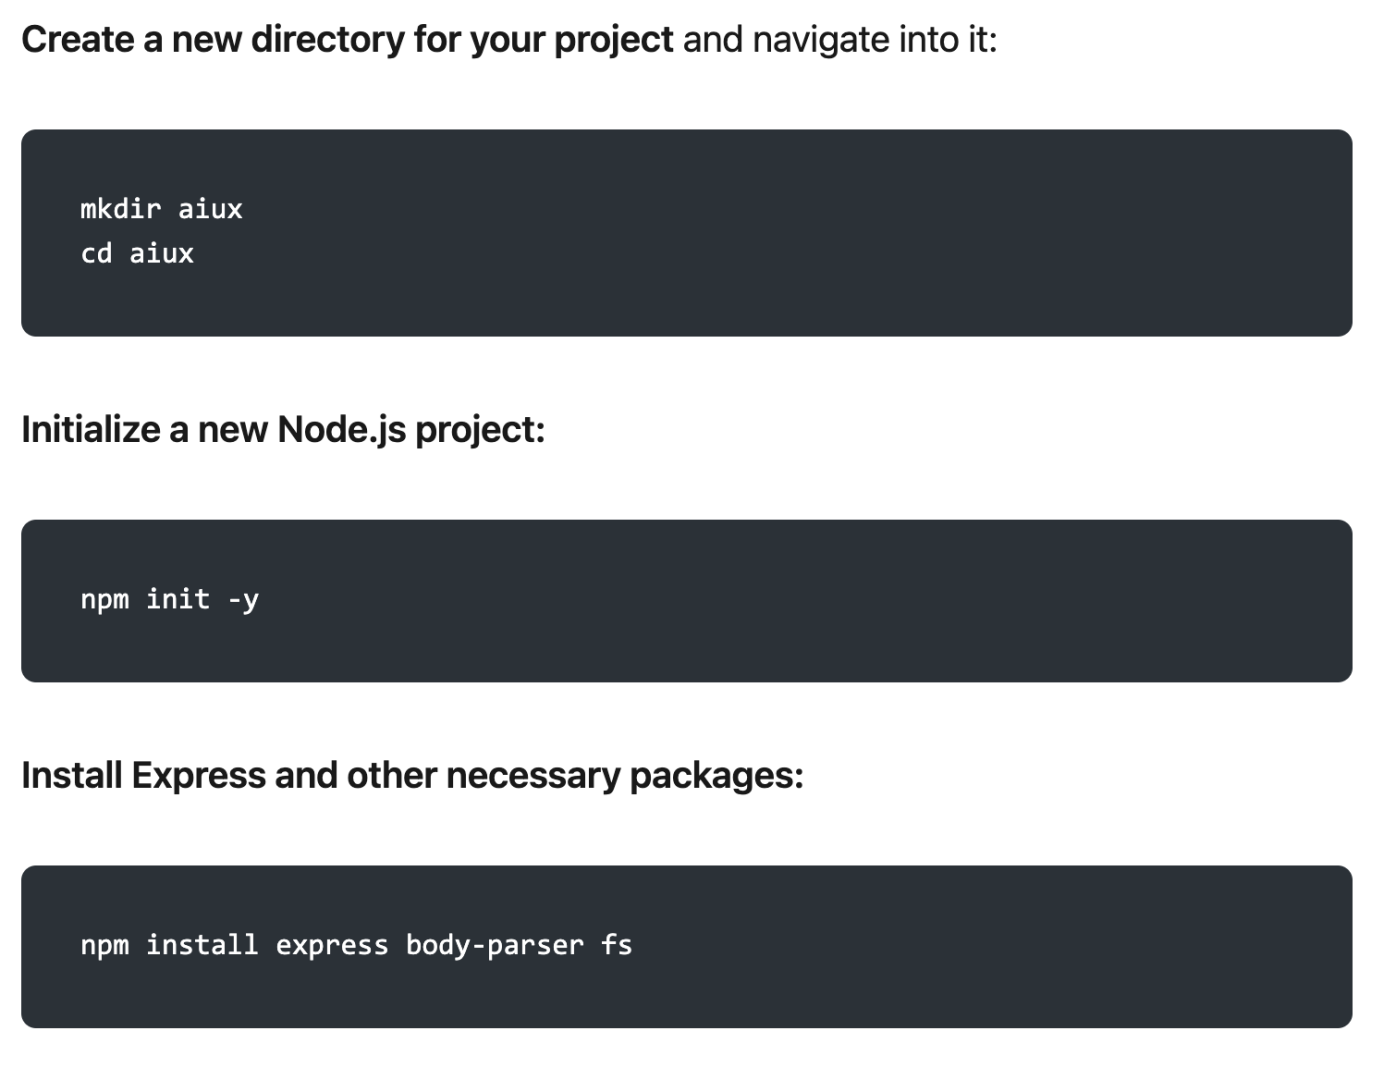 Create_a_new_directory_for_your_project_and_navigate_into_it.png